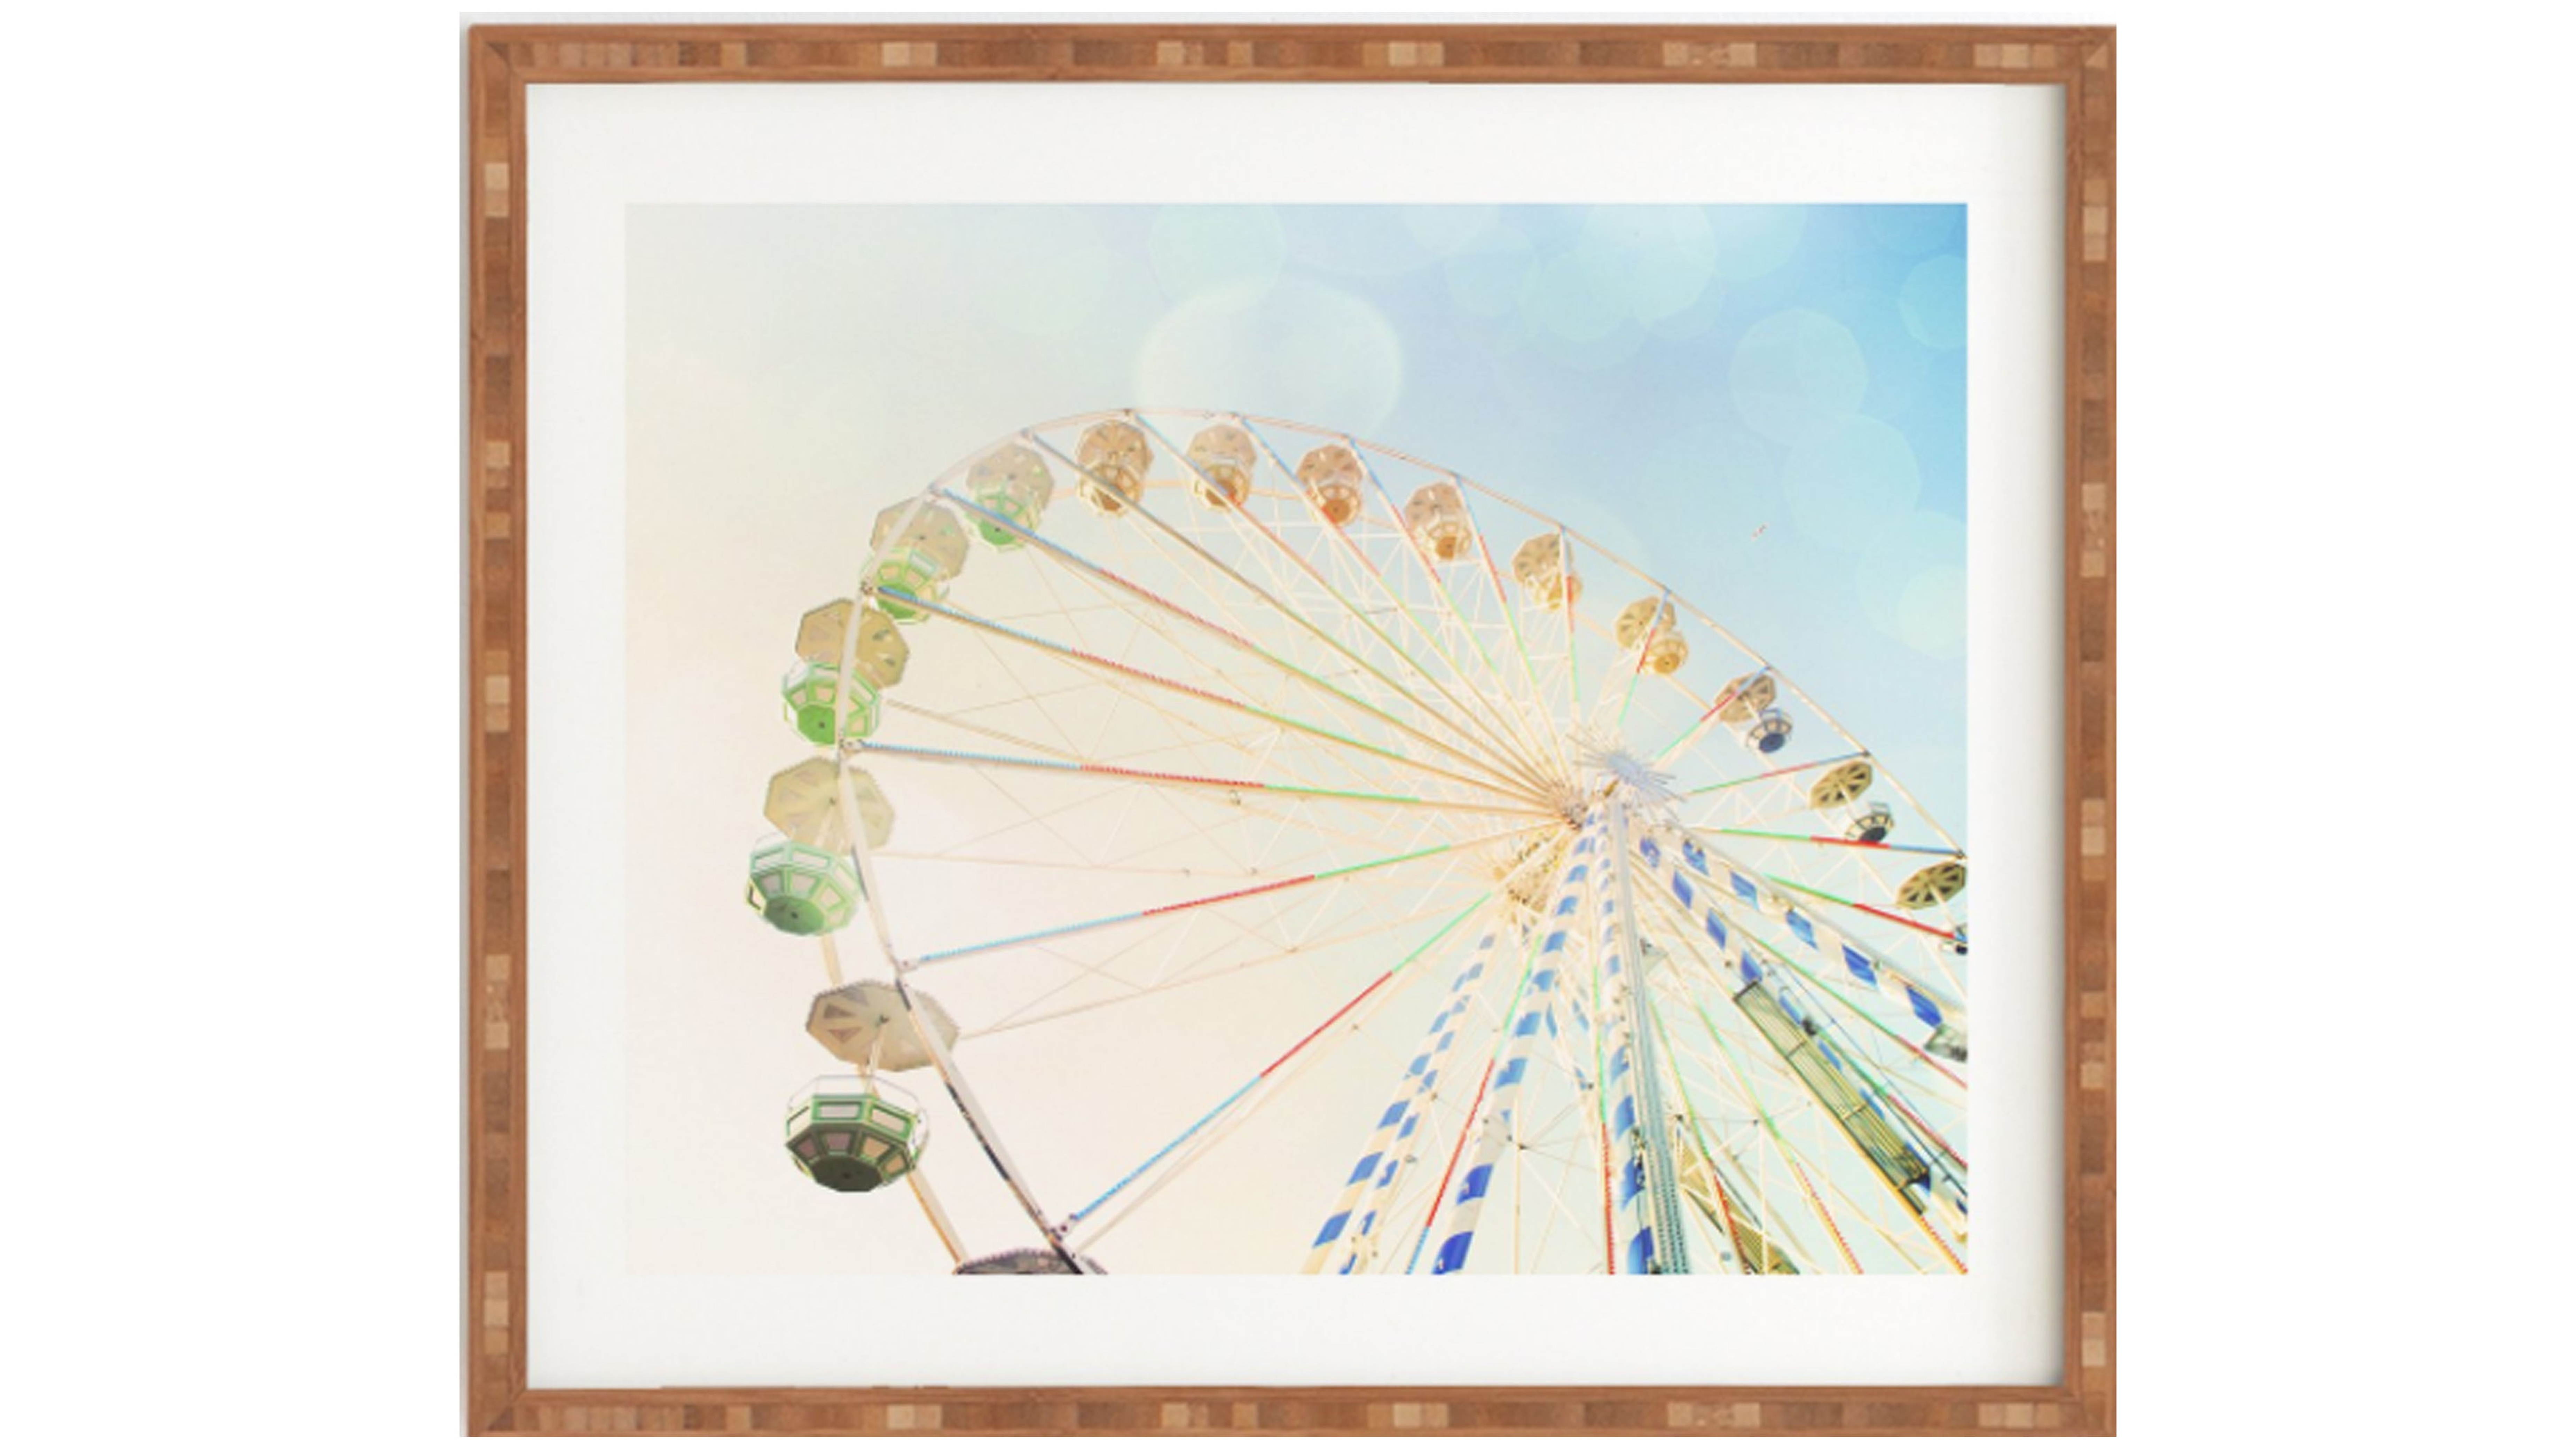 Ferris Wheel, Canvas, 24 x 30 canvas, not pictured. - Wander Print Co.